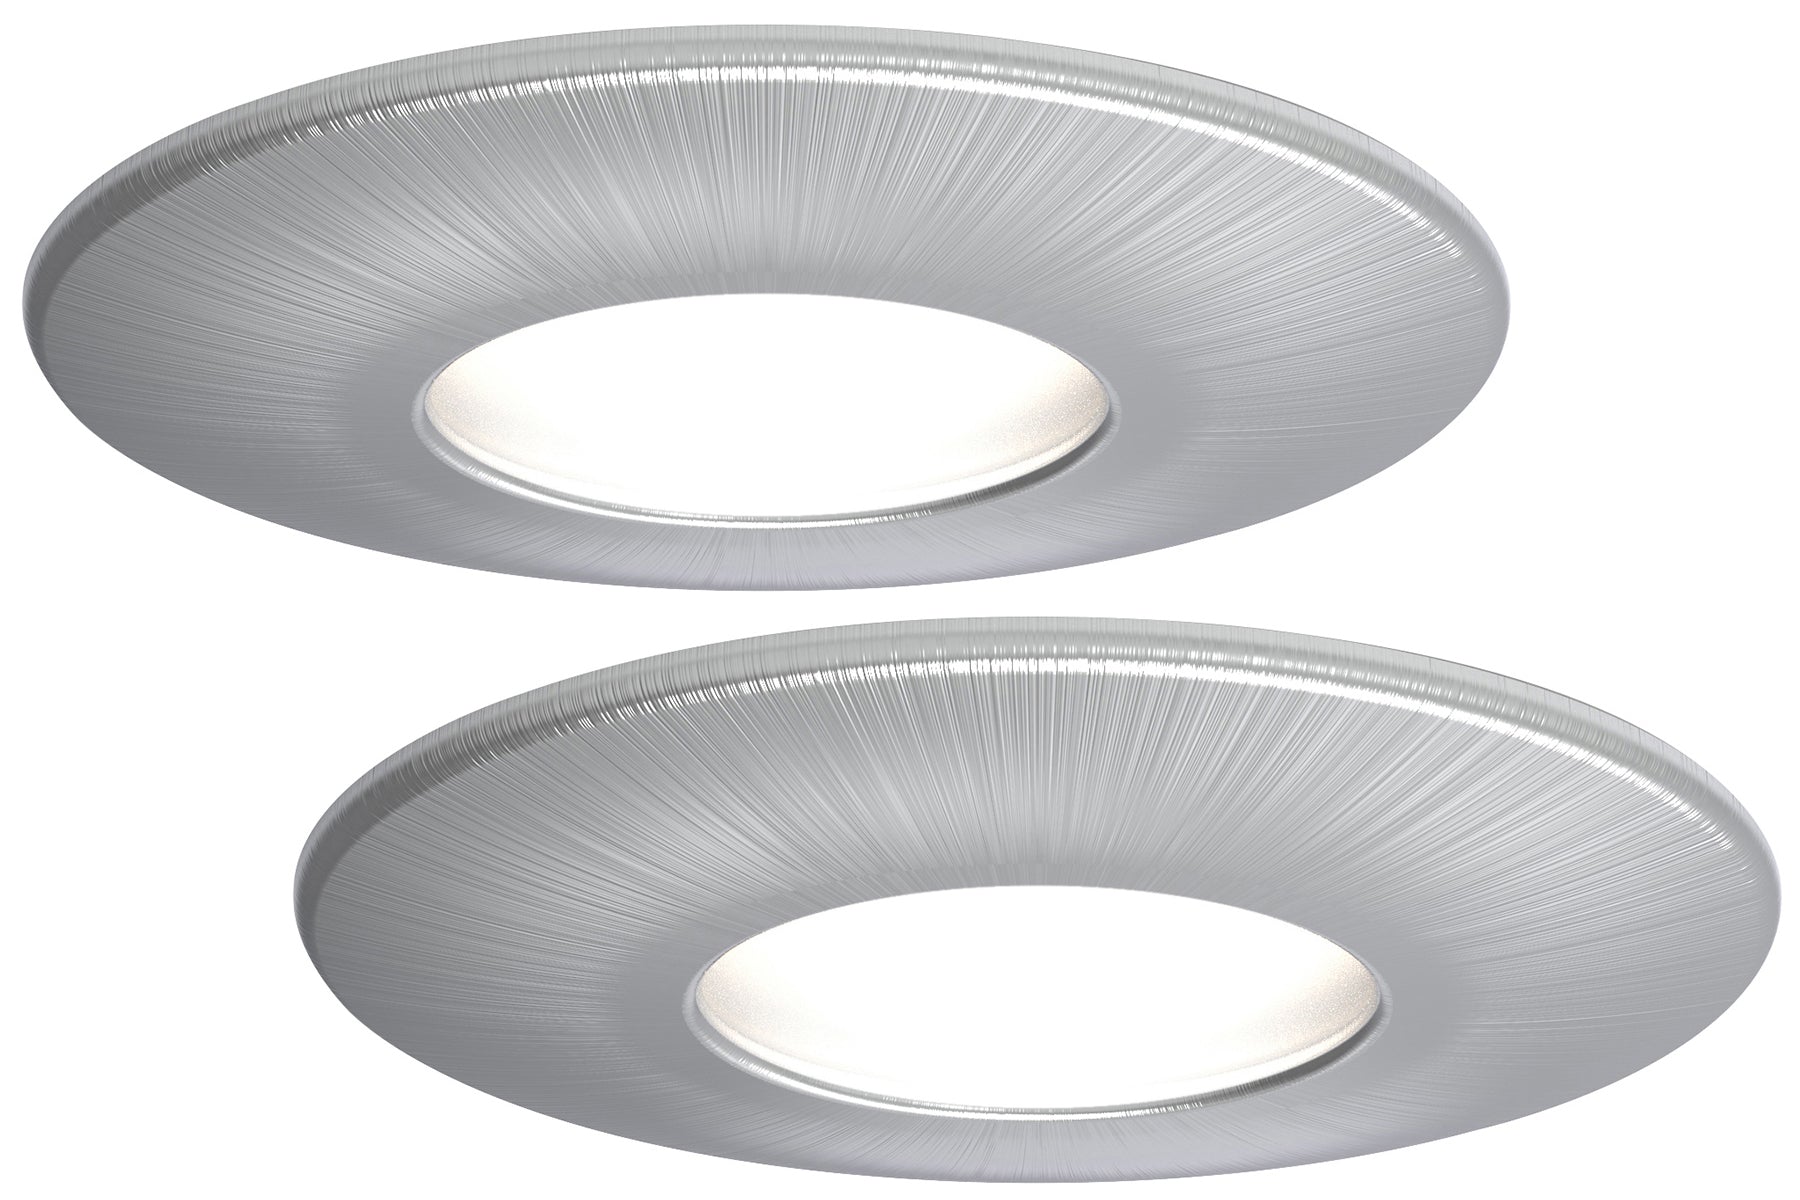 4lite WiZ Connected Fire-Rated IP65 GU10 Smart LED Downlight - Satin Chrome (Pack of 2)